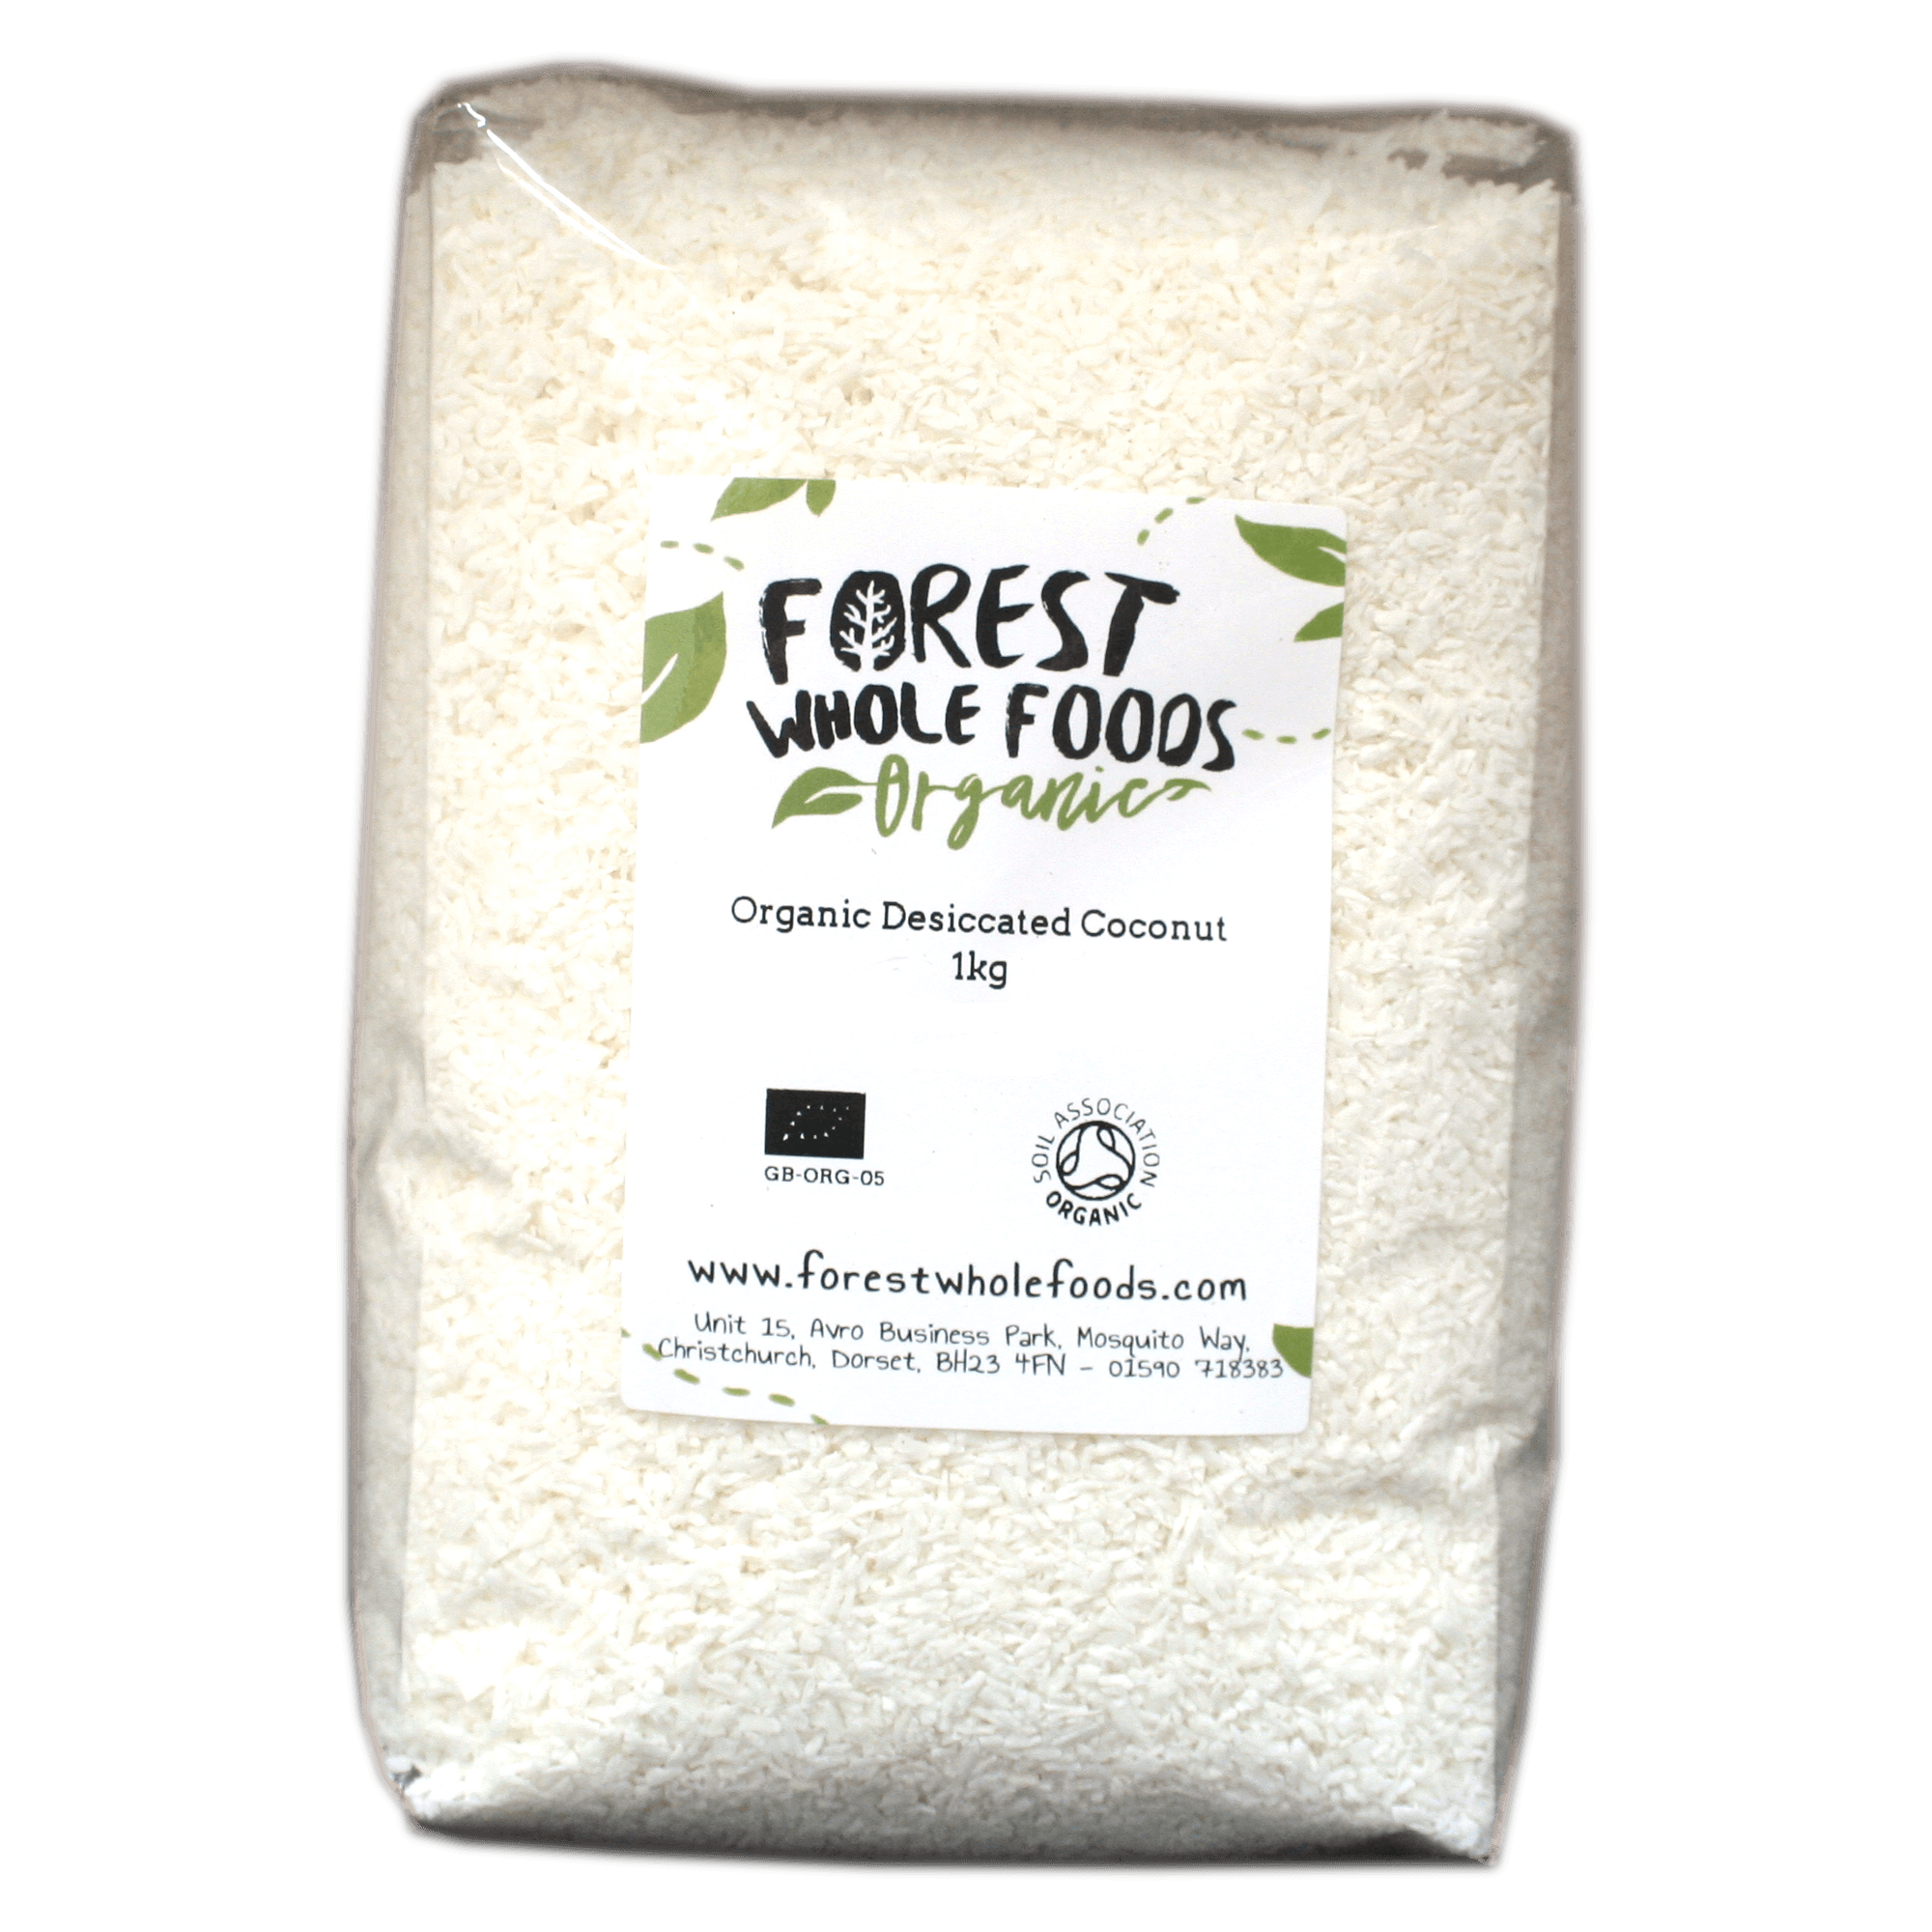 Organic desiccated coconut